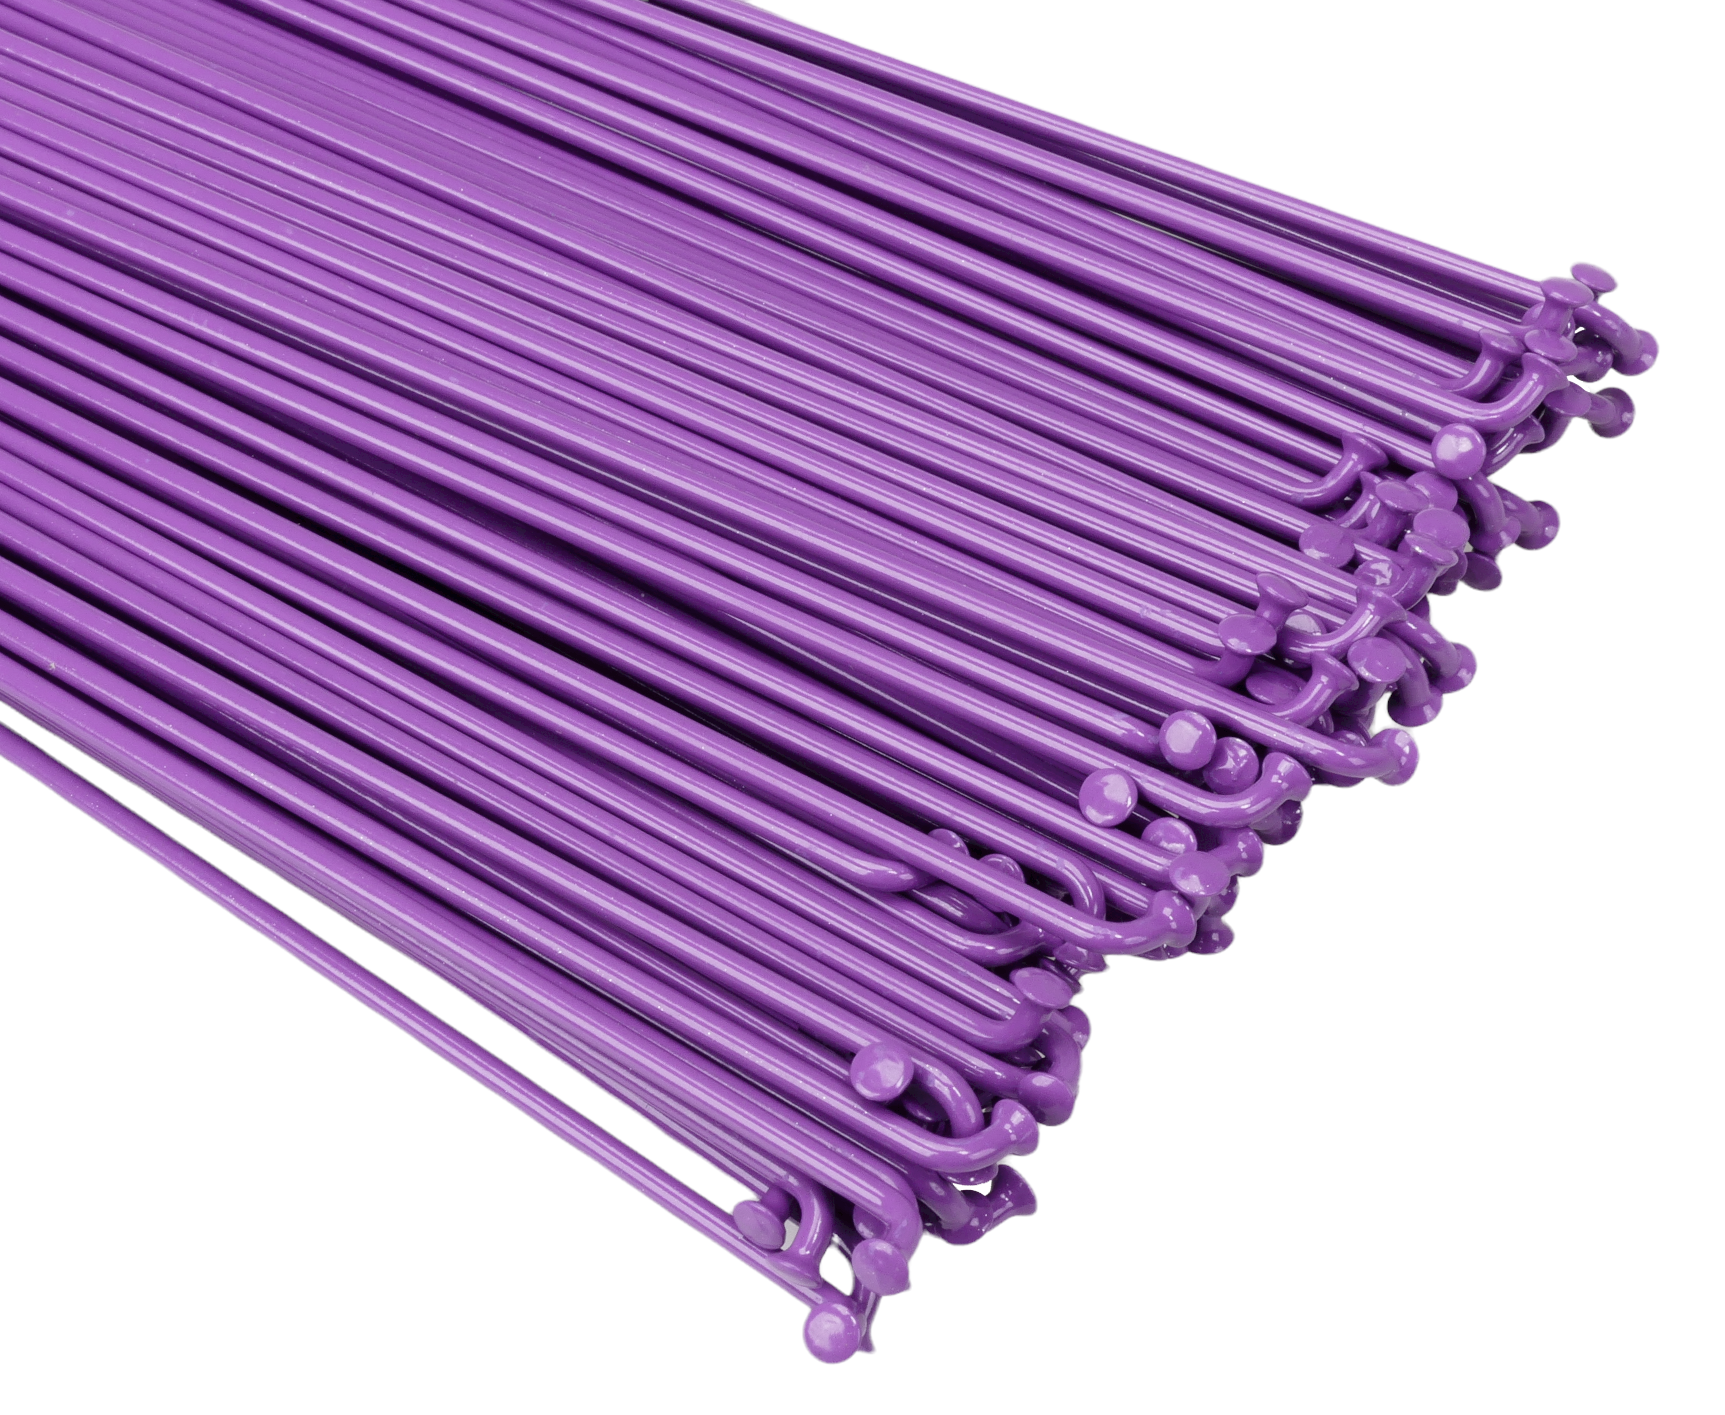 ANY LENGTH **NON-REFUNDABLE*** Stainless Steel J-bend Bicycle Spokes 14G  (2.0mm) non-butted (EACH) PURPLE